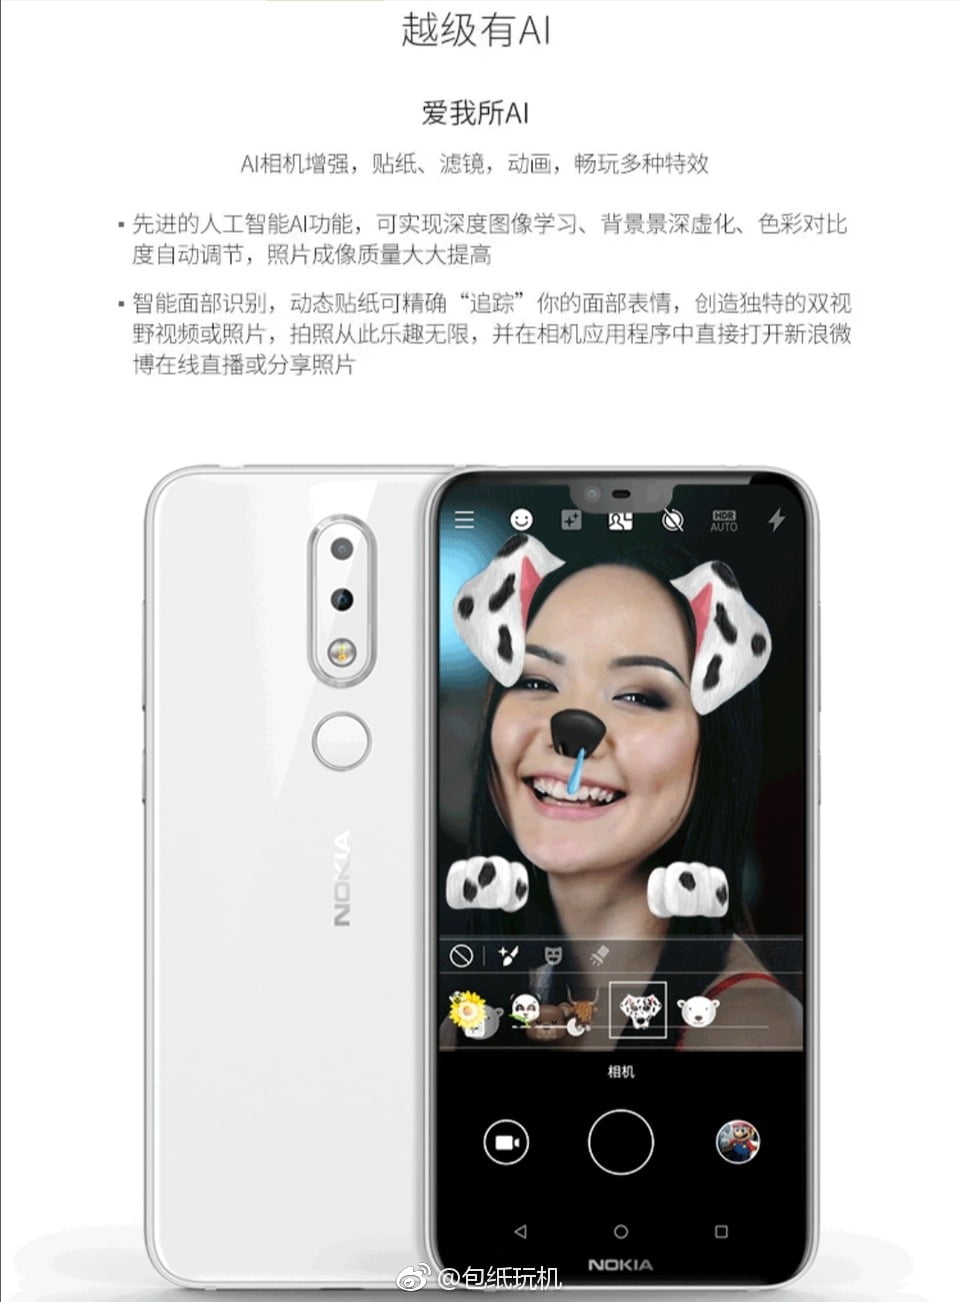 Well, AI Stickers are also present on the Nokia X6